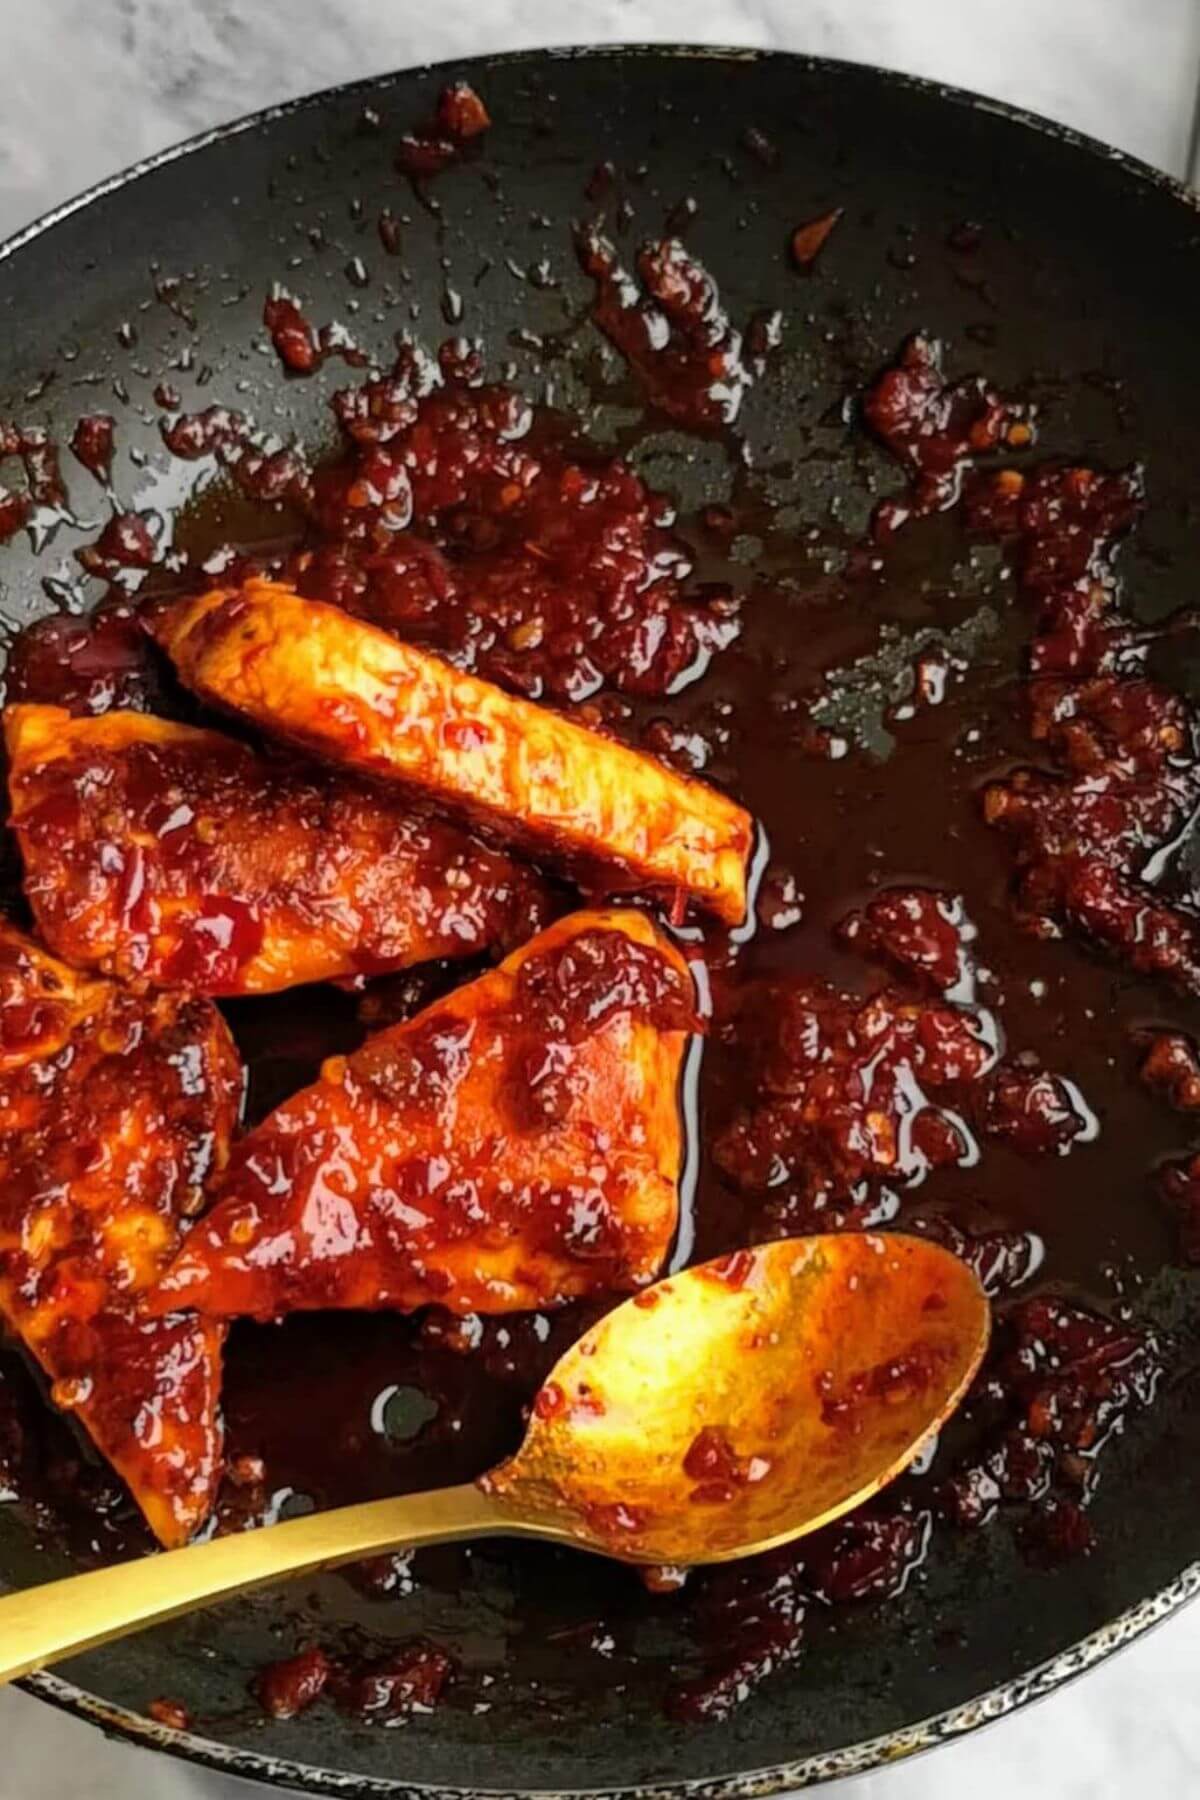 Halloumi triangles being mixed with honey and harissa sauce